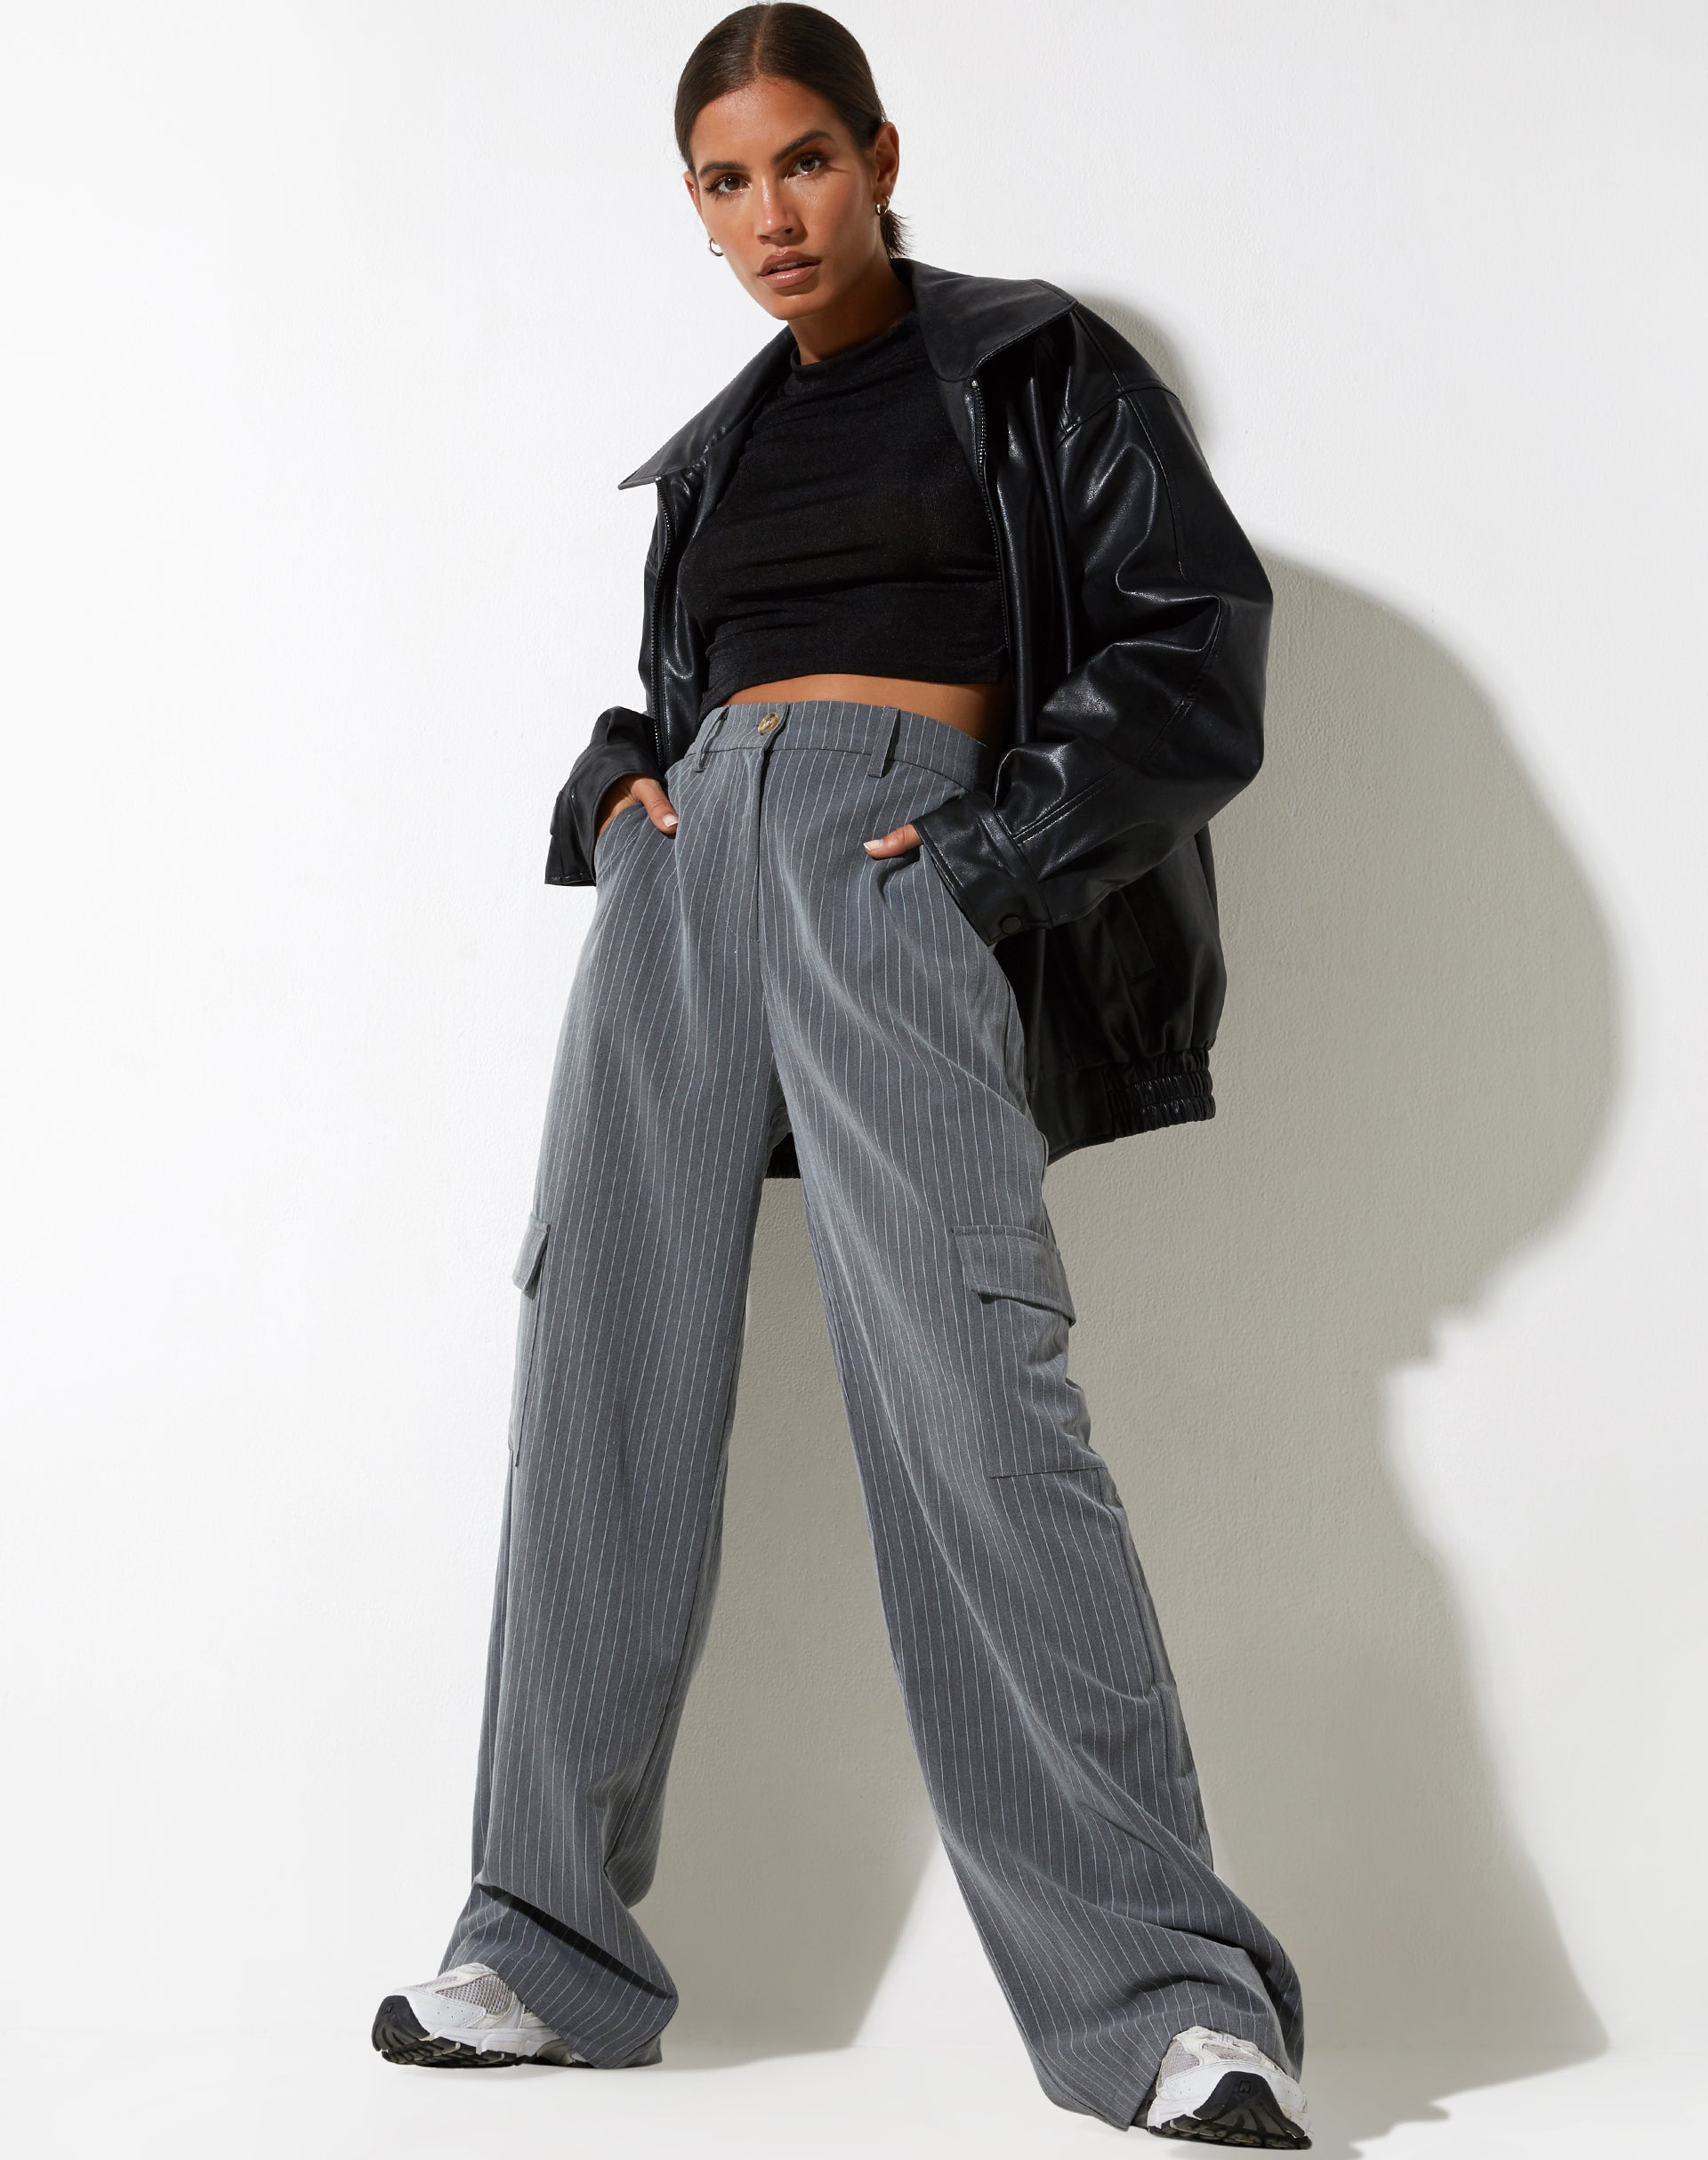 image of Abba Cargo Trouser in Pinstripe Grey